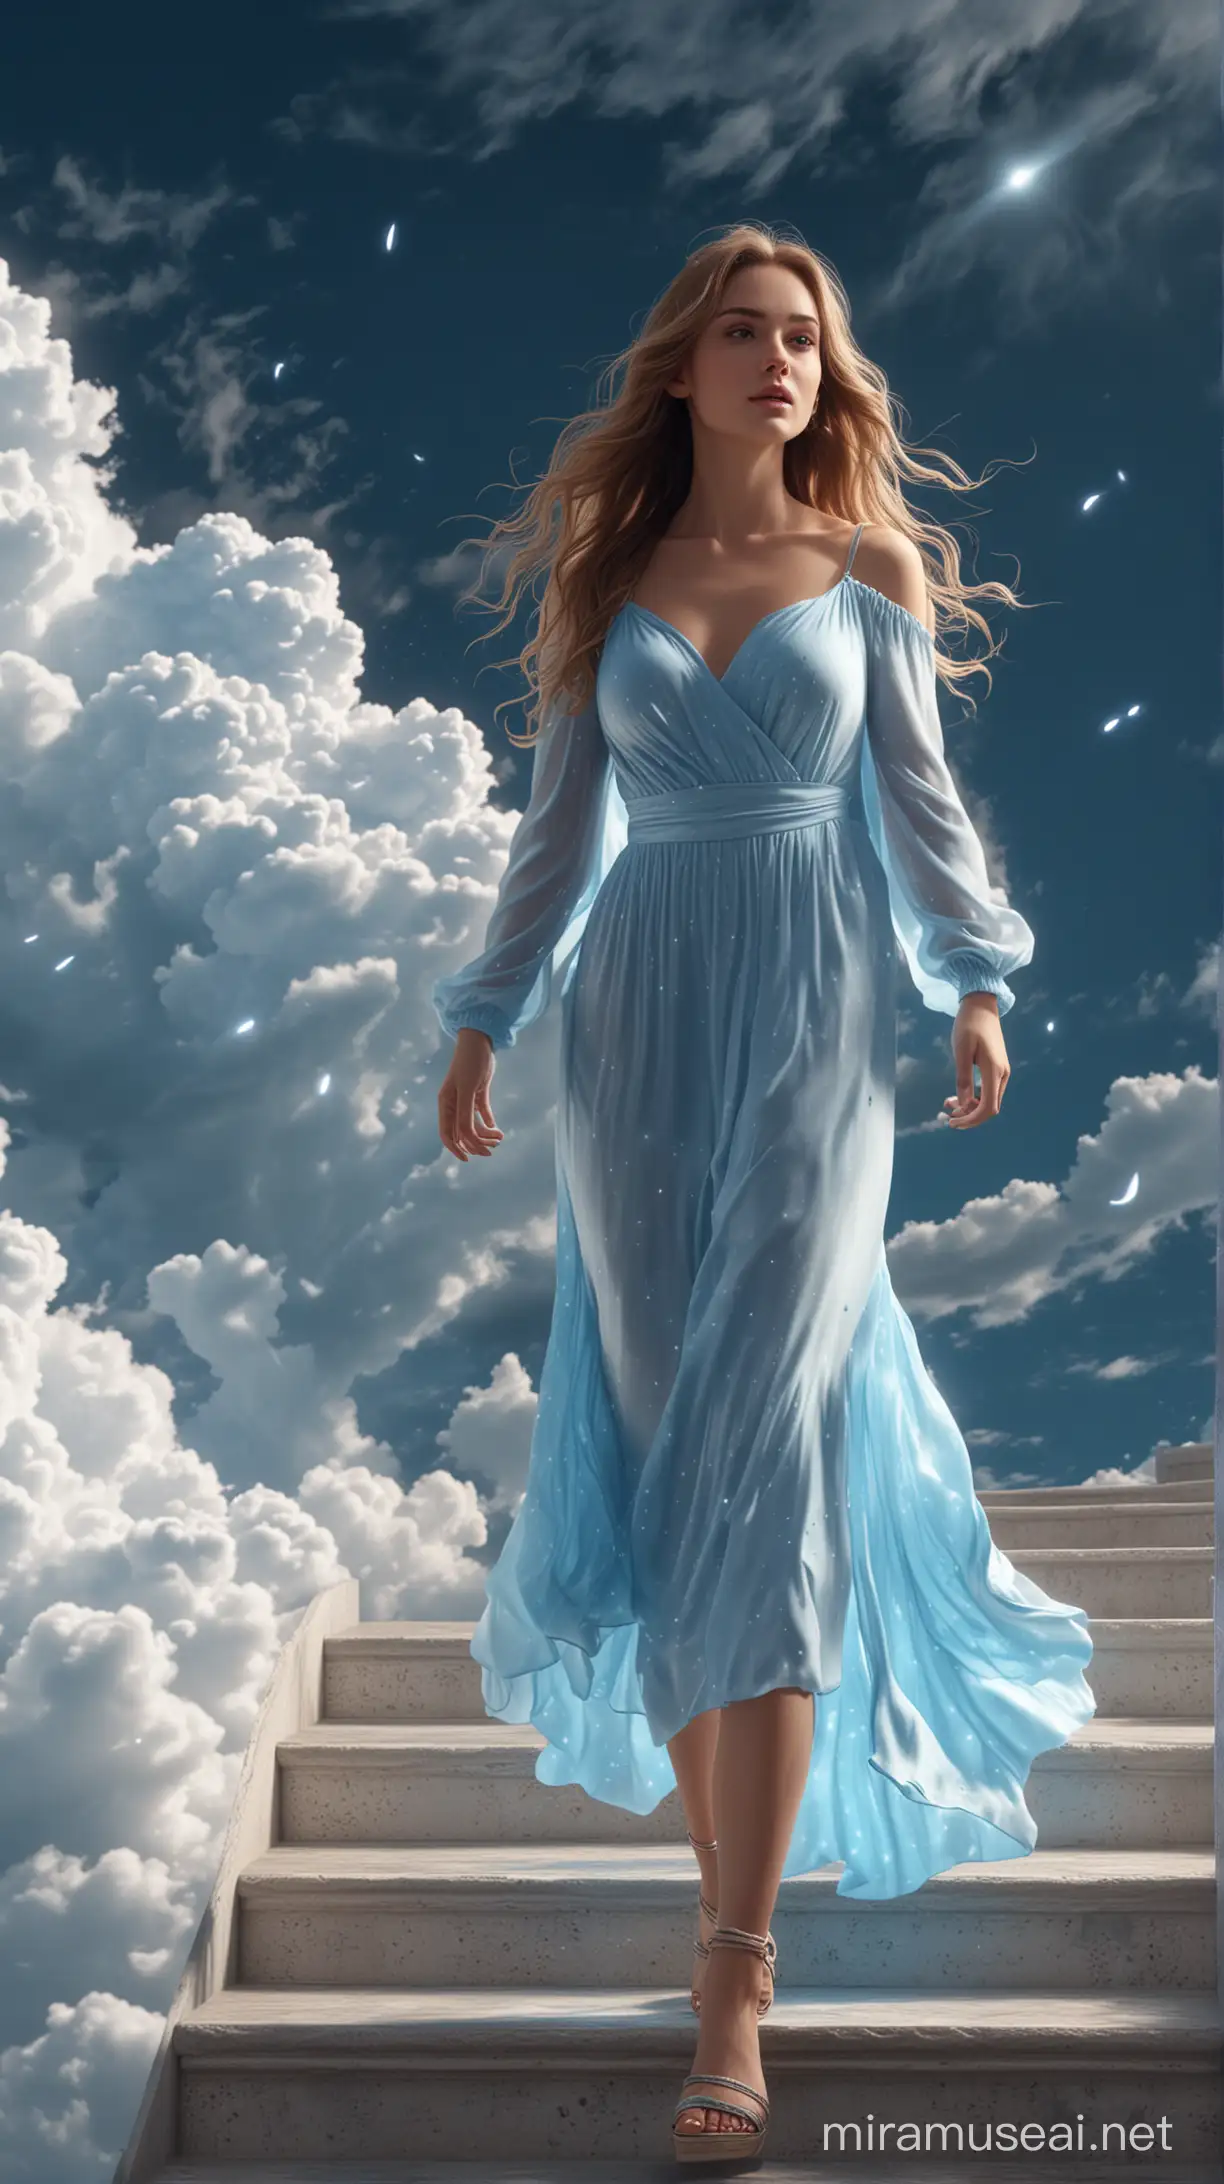 Stunning 3D Minimal Illustration Graceful Woman Ascending Staircase to Glittering Cloud Heaven